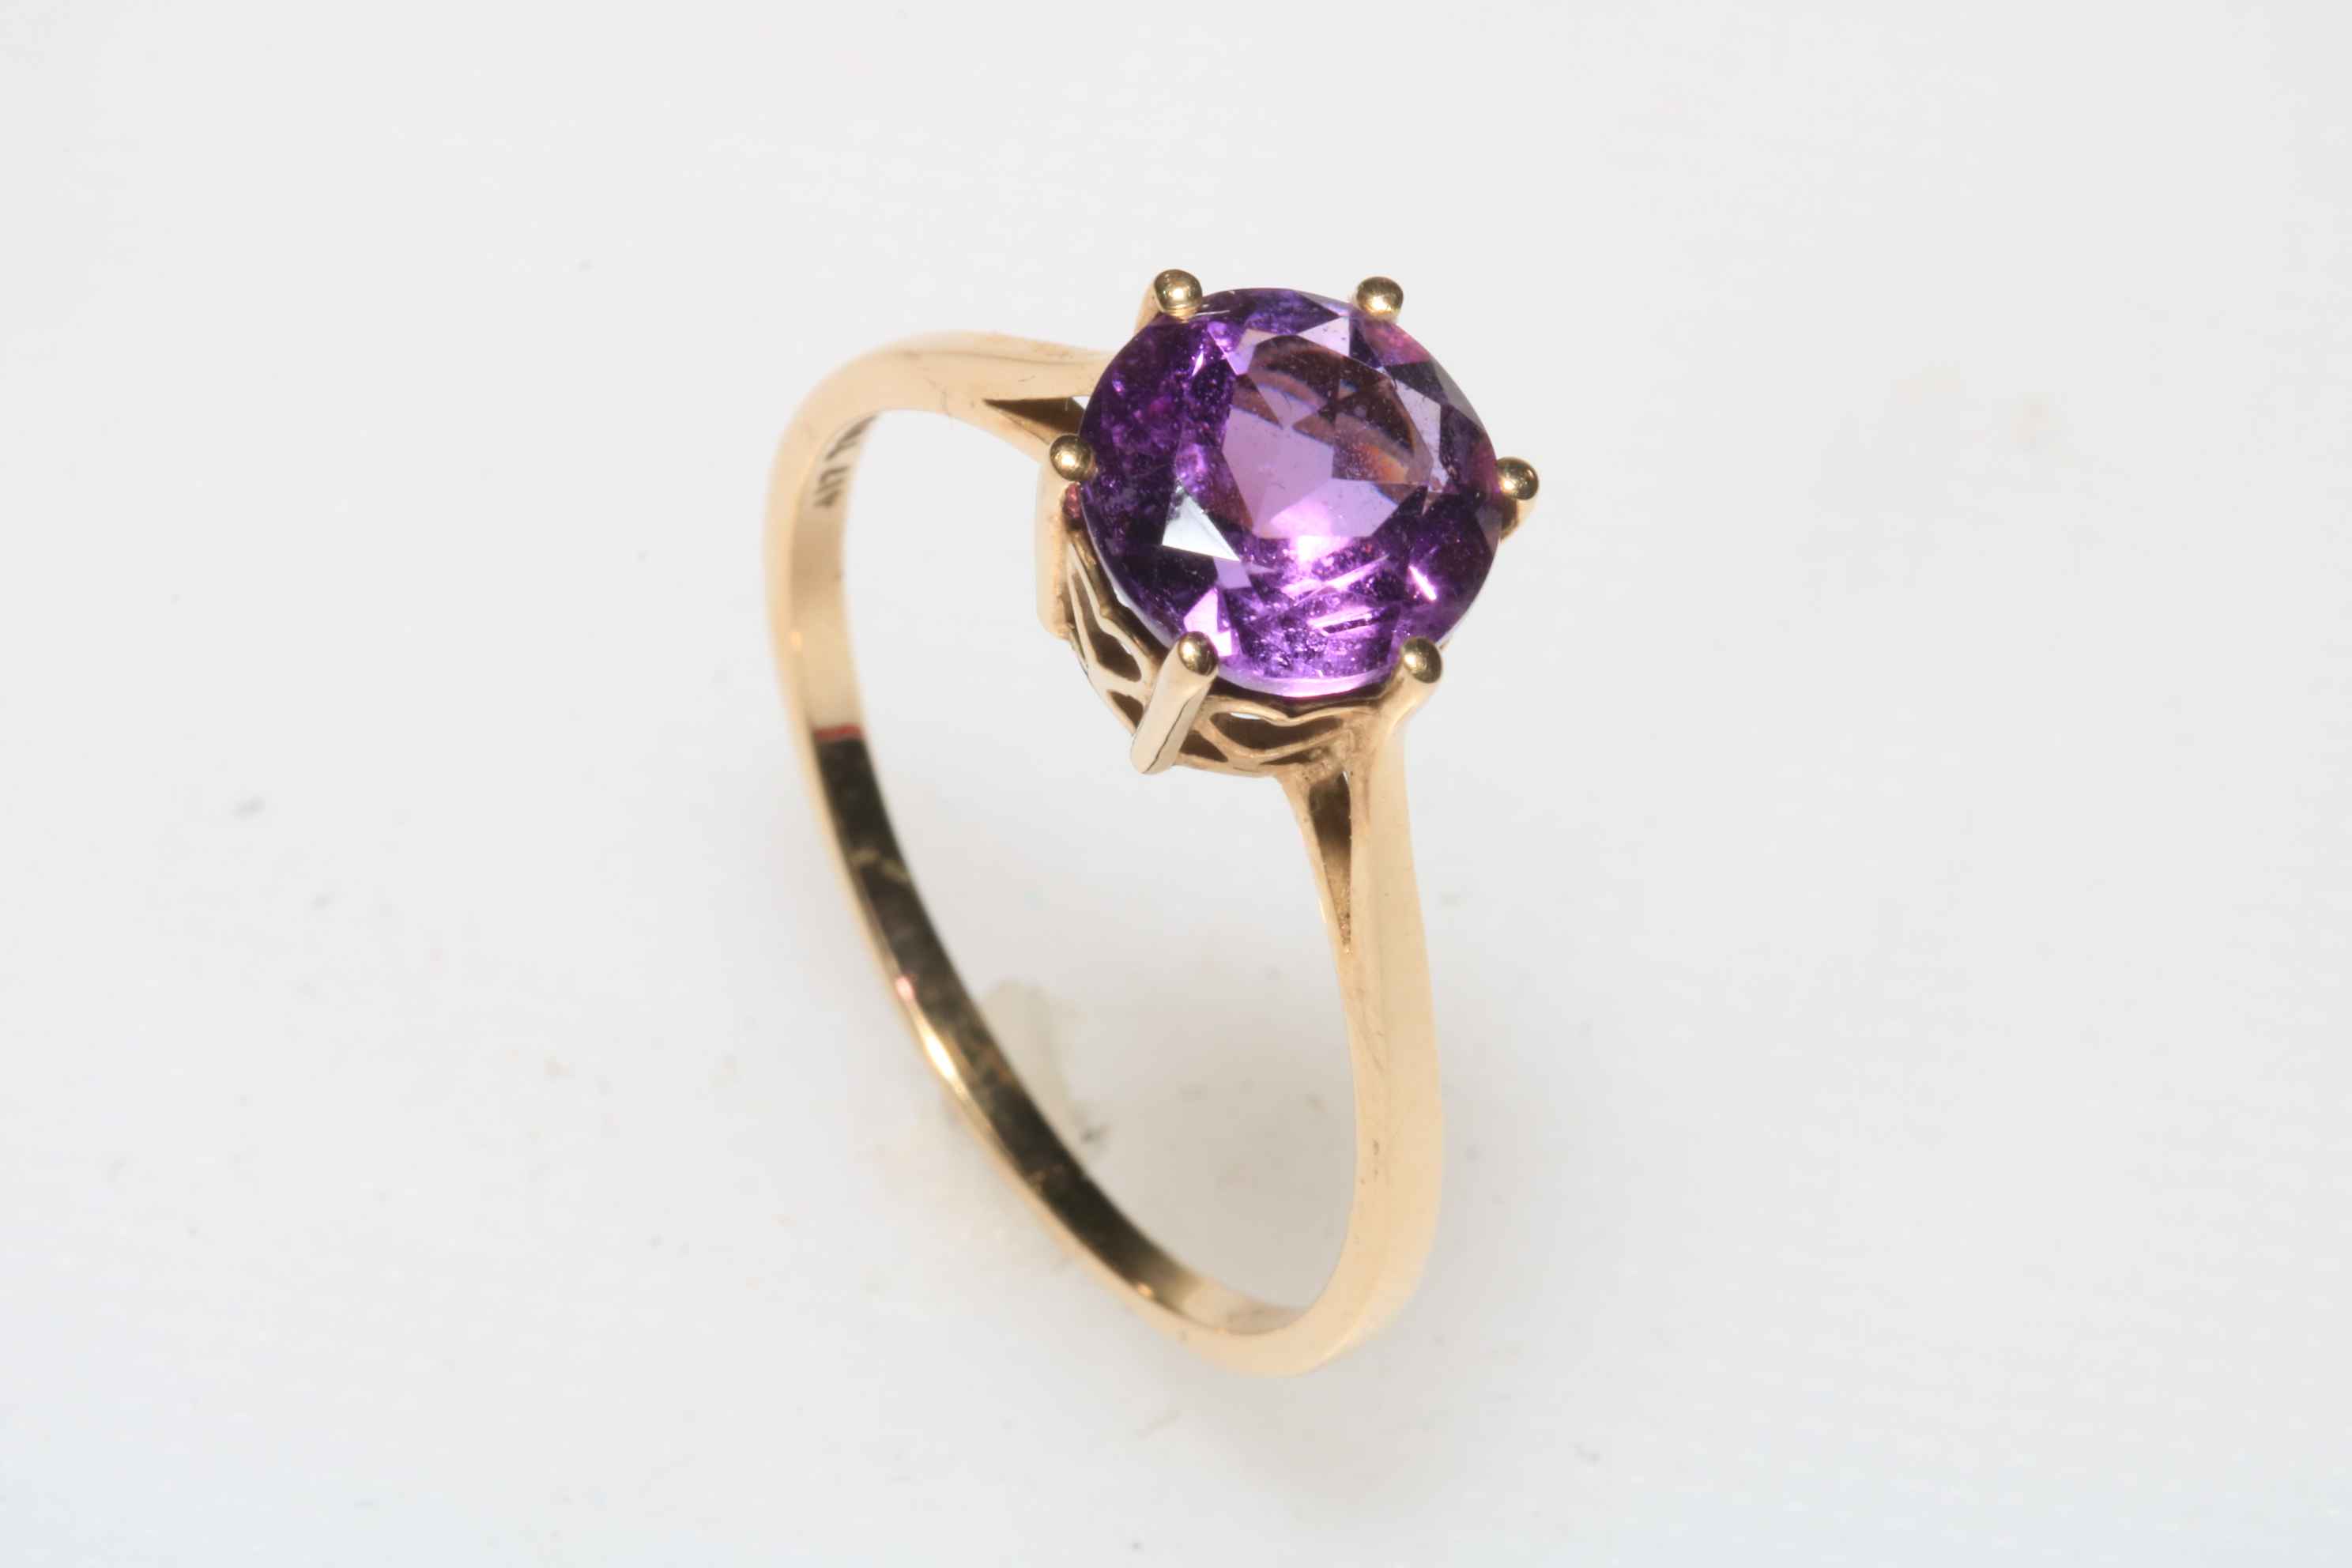 Kalomo Amethyst 9 carat gold ring with heart pierced shoulder, size S, with certificate.